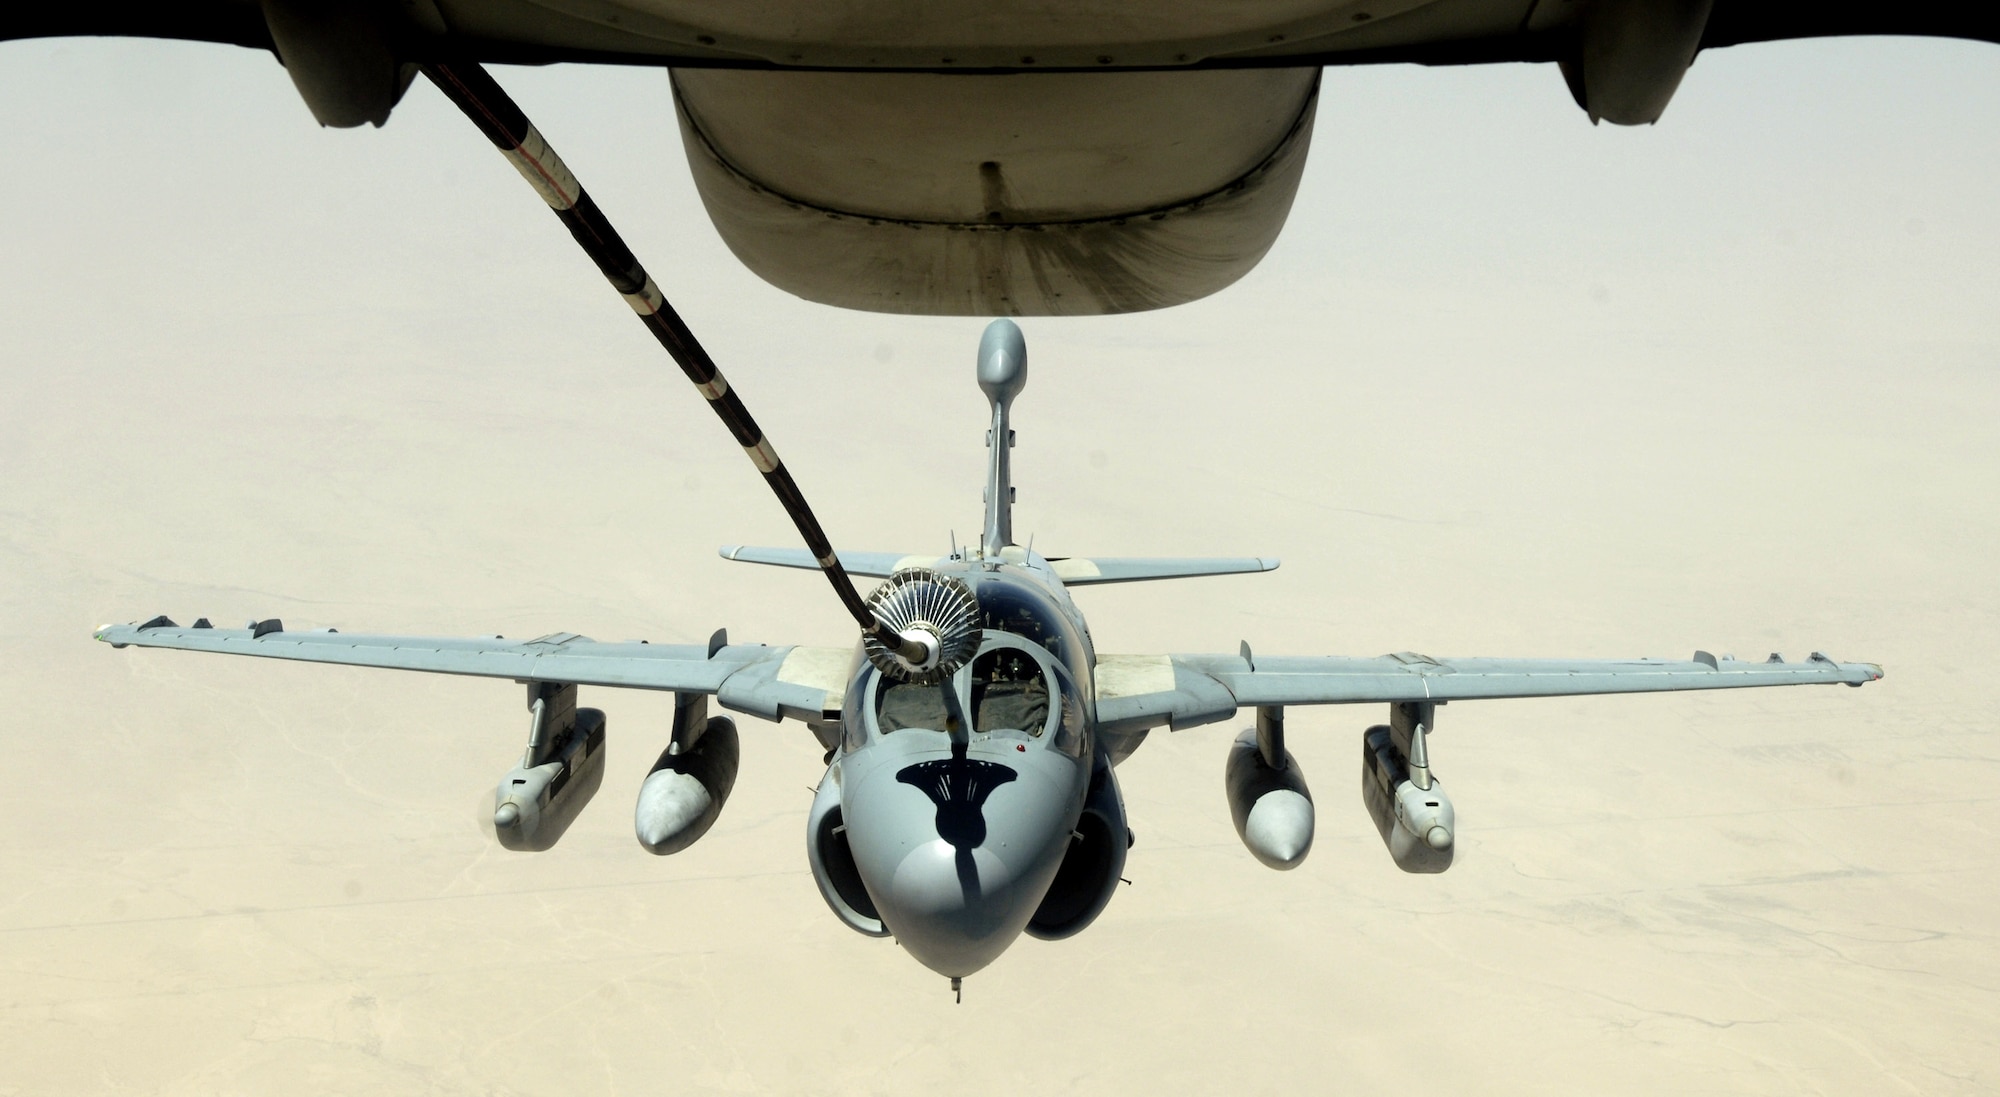 An EA-6 Prowler refuels from the drogue of a KC-10 Extender on July 18. The KC-10 is with the 908th Expeditionary Air Refueling Squadron in Southwest Asia. (U.S. Air Force photo/Senior Airman Brian Ferguson)

